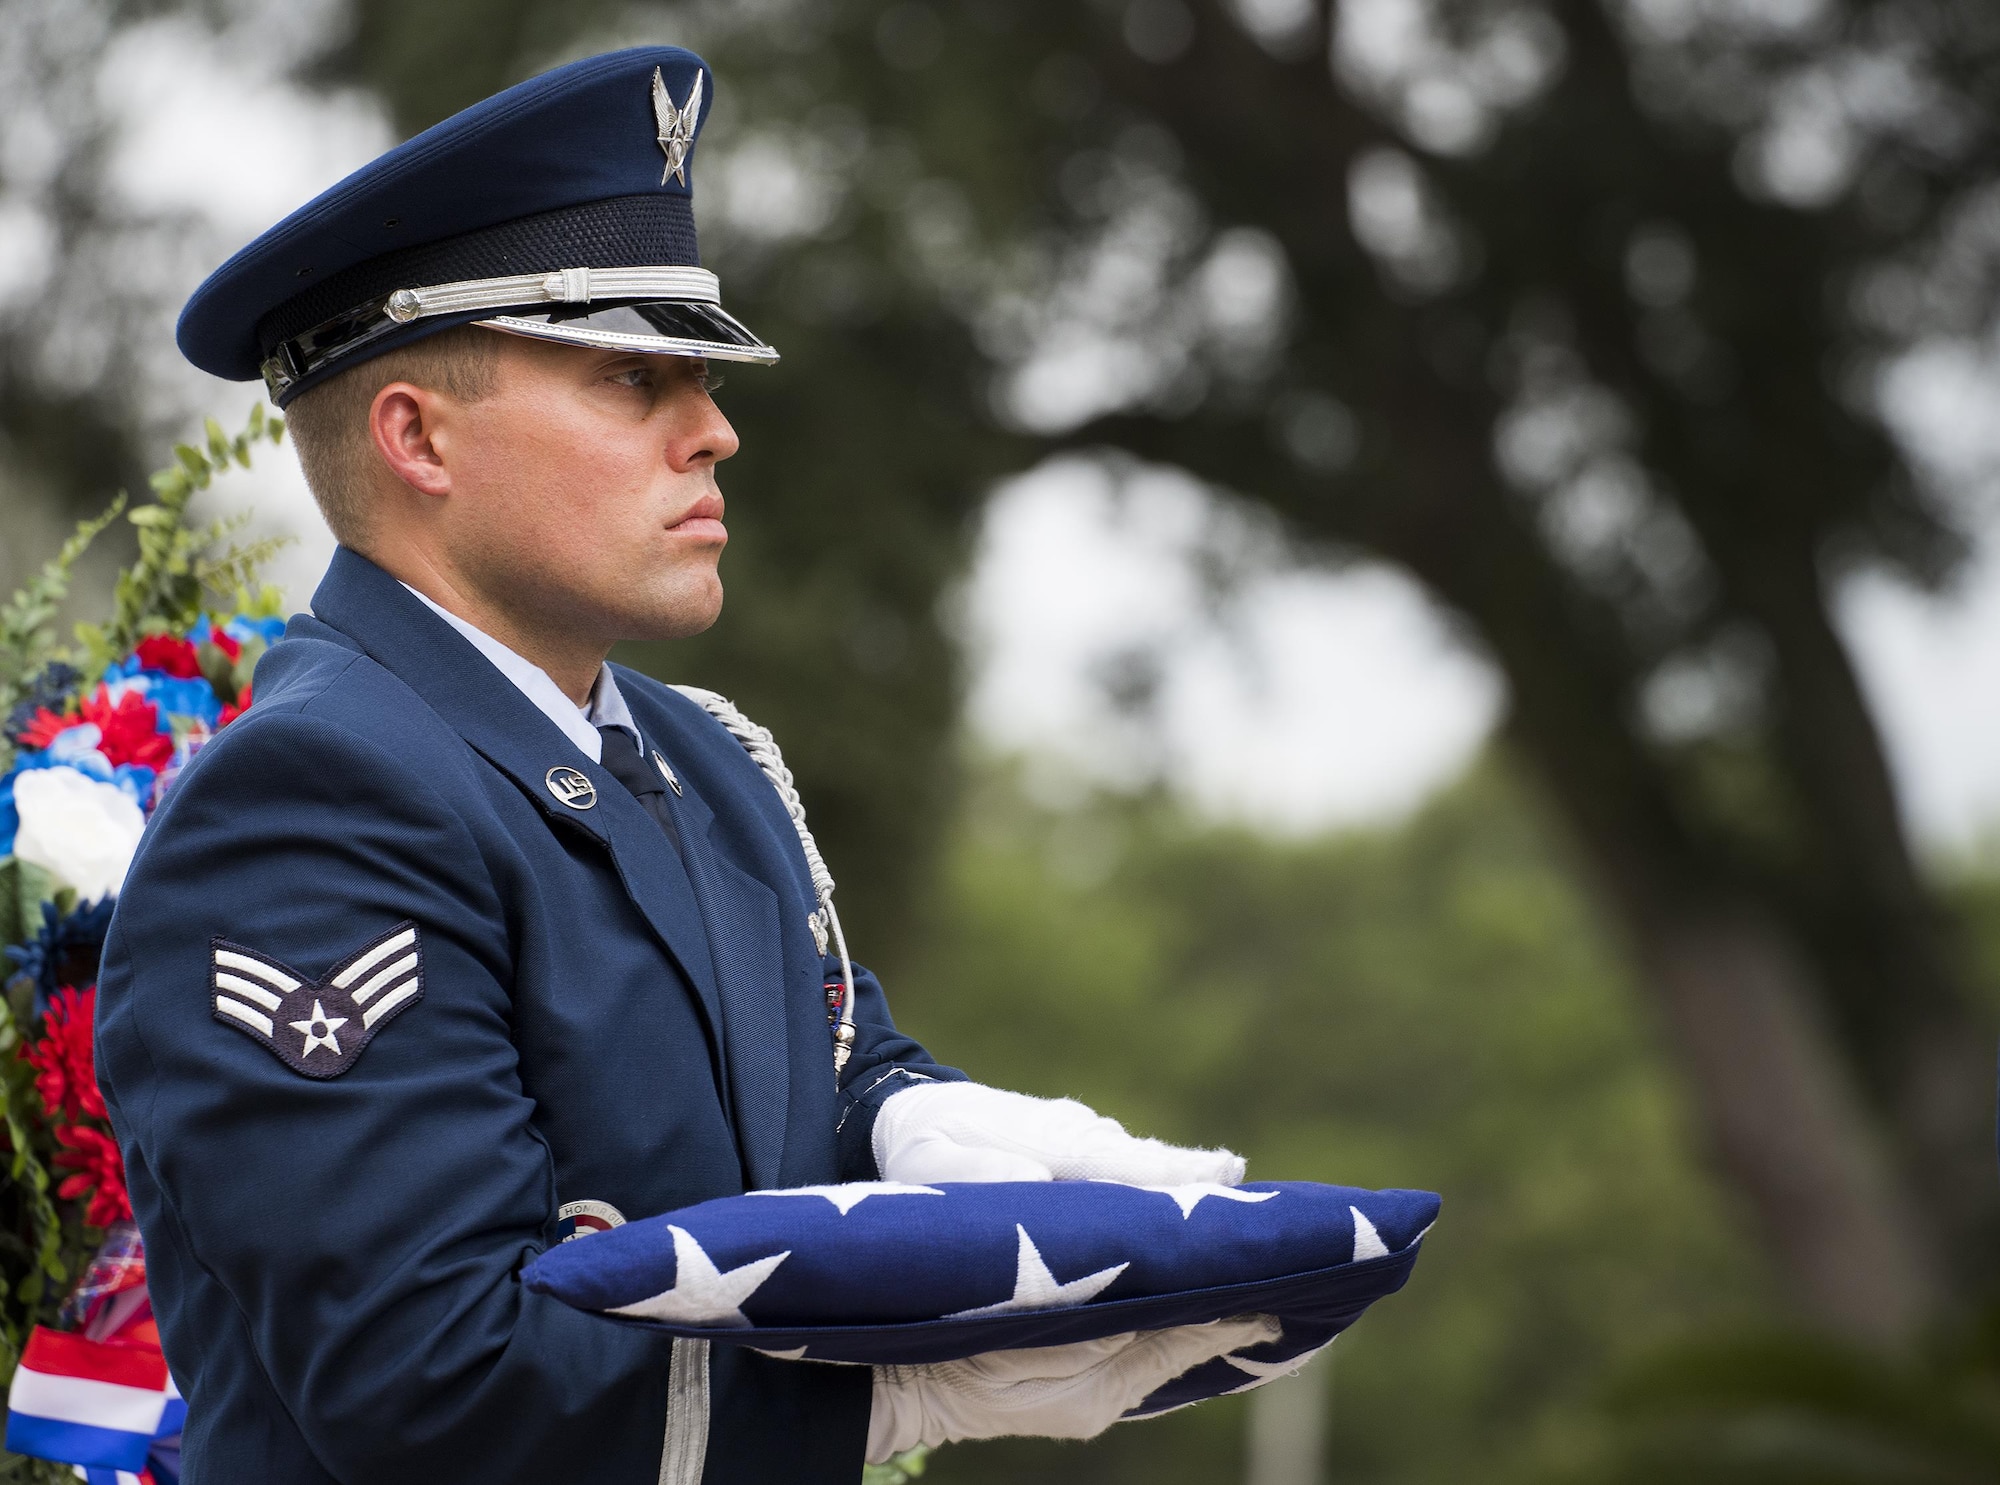 Senior Airman Keith Wheeldon, Eglin Air Force Base honor guard, holds an American flag at the POW/MIA Recognition Day event Sept. 16 at the Air Force Armament Museum. The ceremony paid tribute to those military members who have yet to return home from defending America. The event featured tributes, guest speakers and honor guard procedures. (U.S. Air Force photo/Samuel King Jr.)